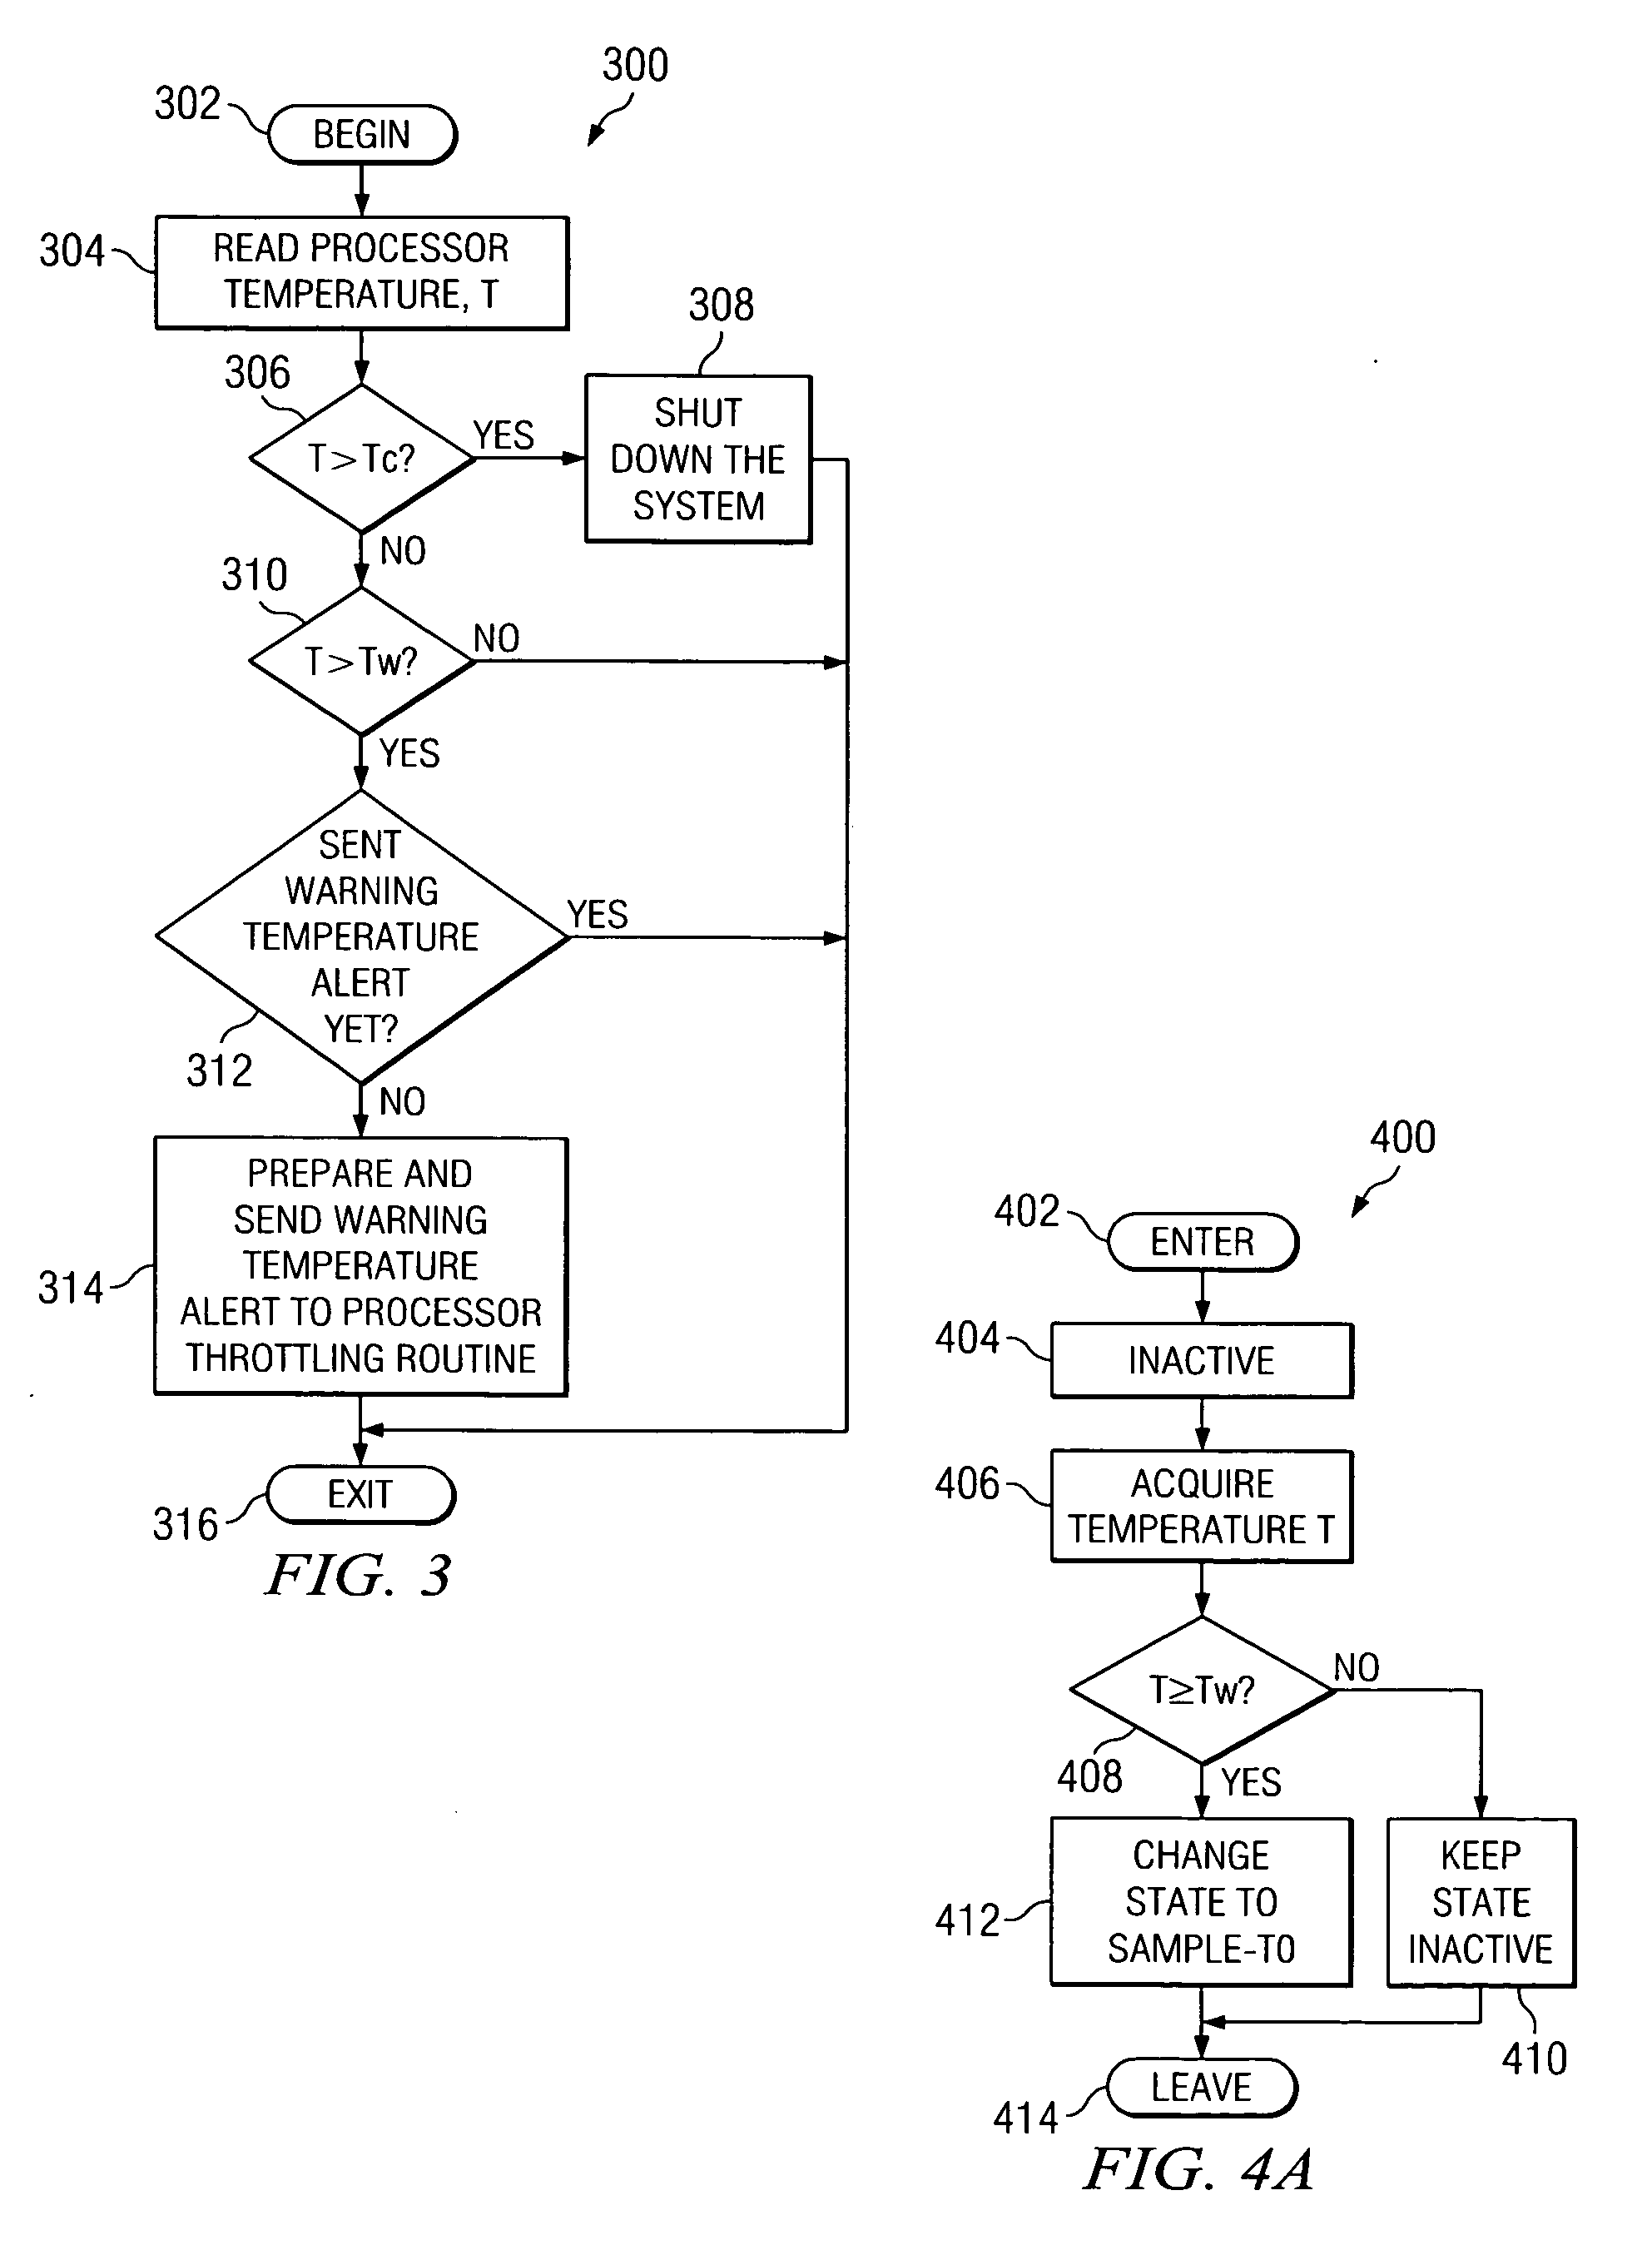 System and method to maintain data processing system operation in degraded system cooling condition